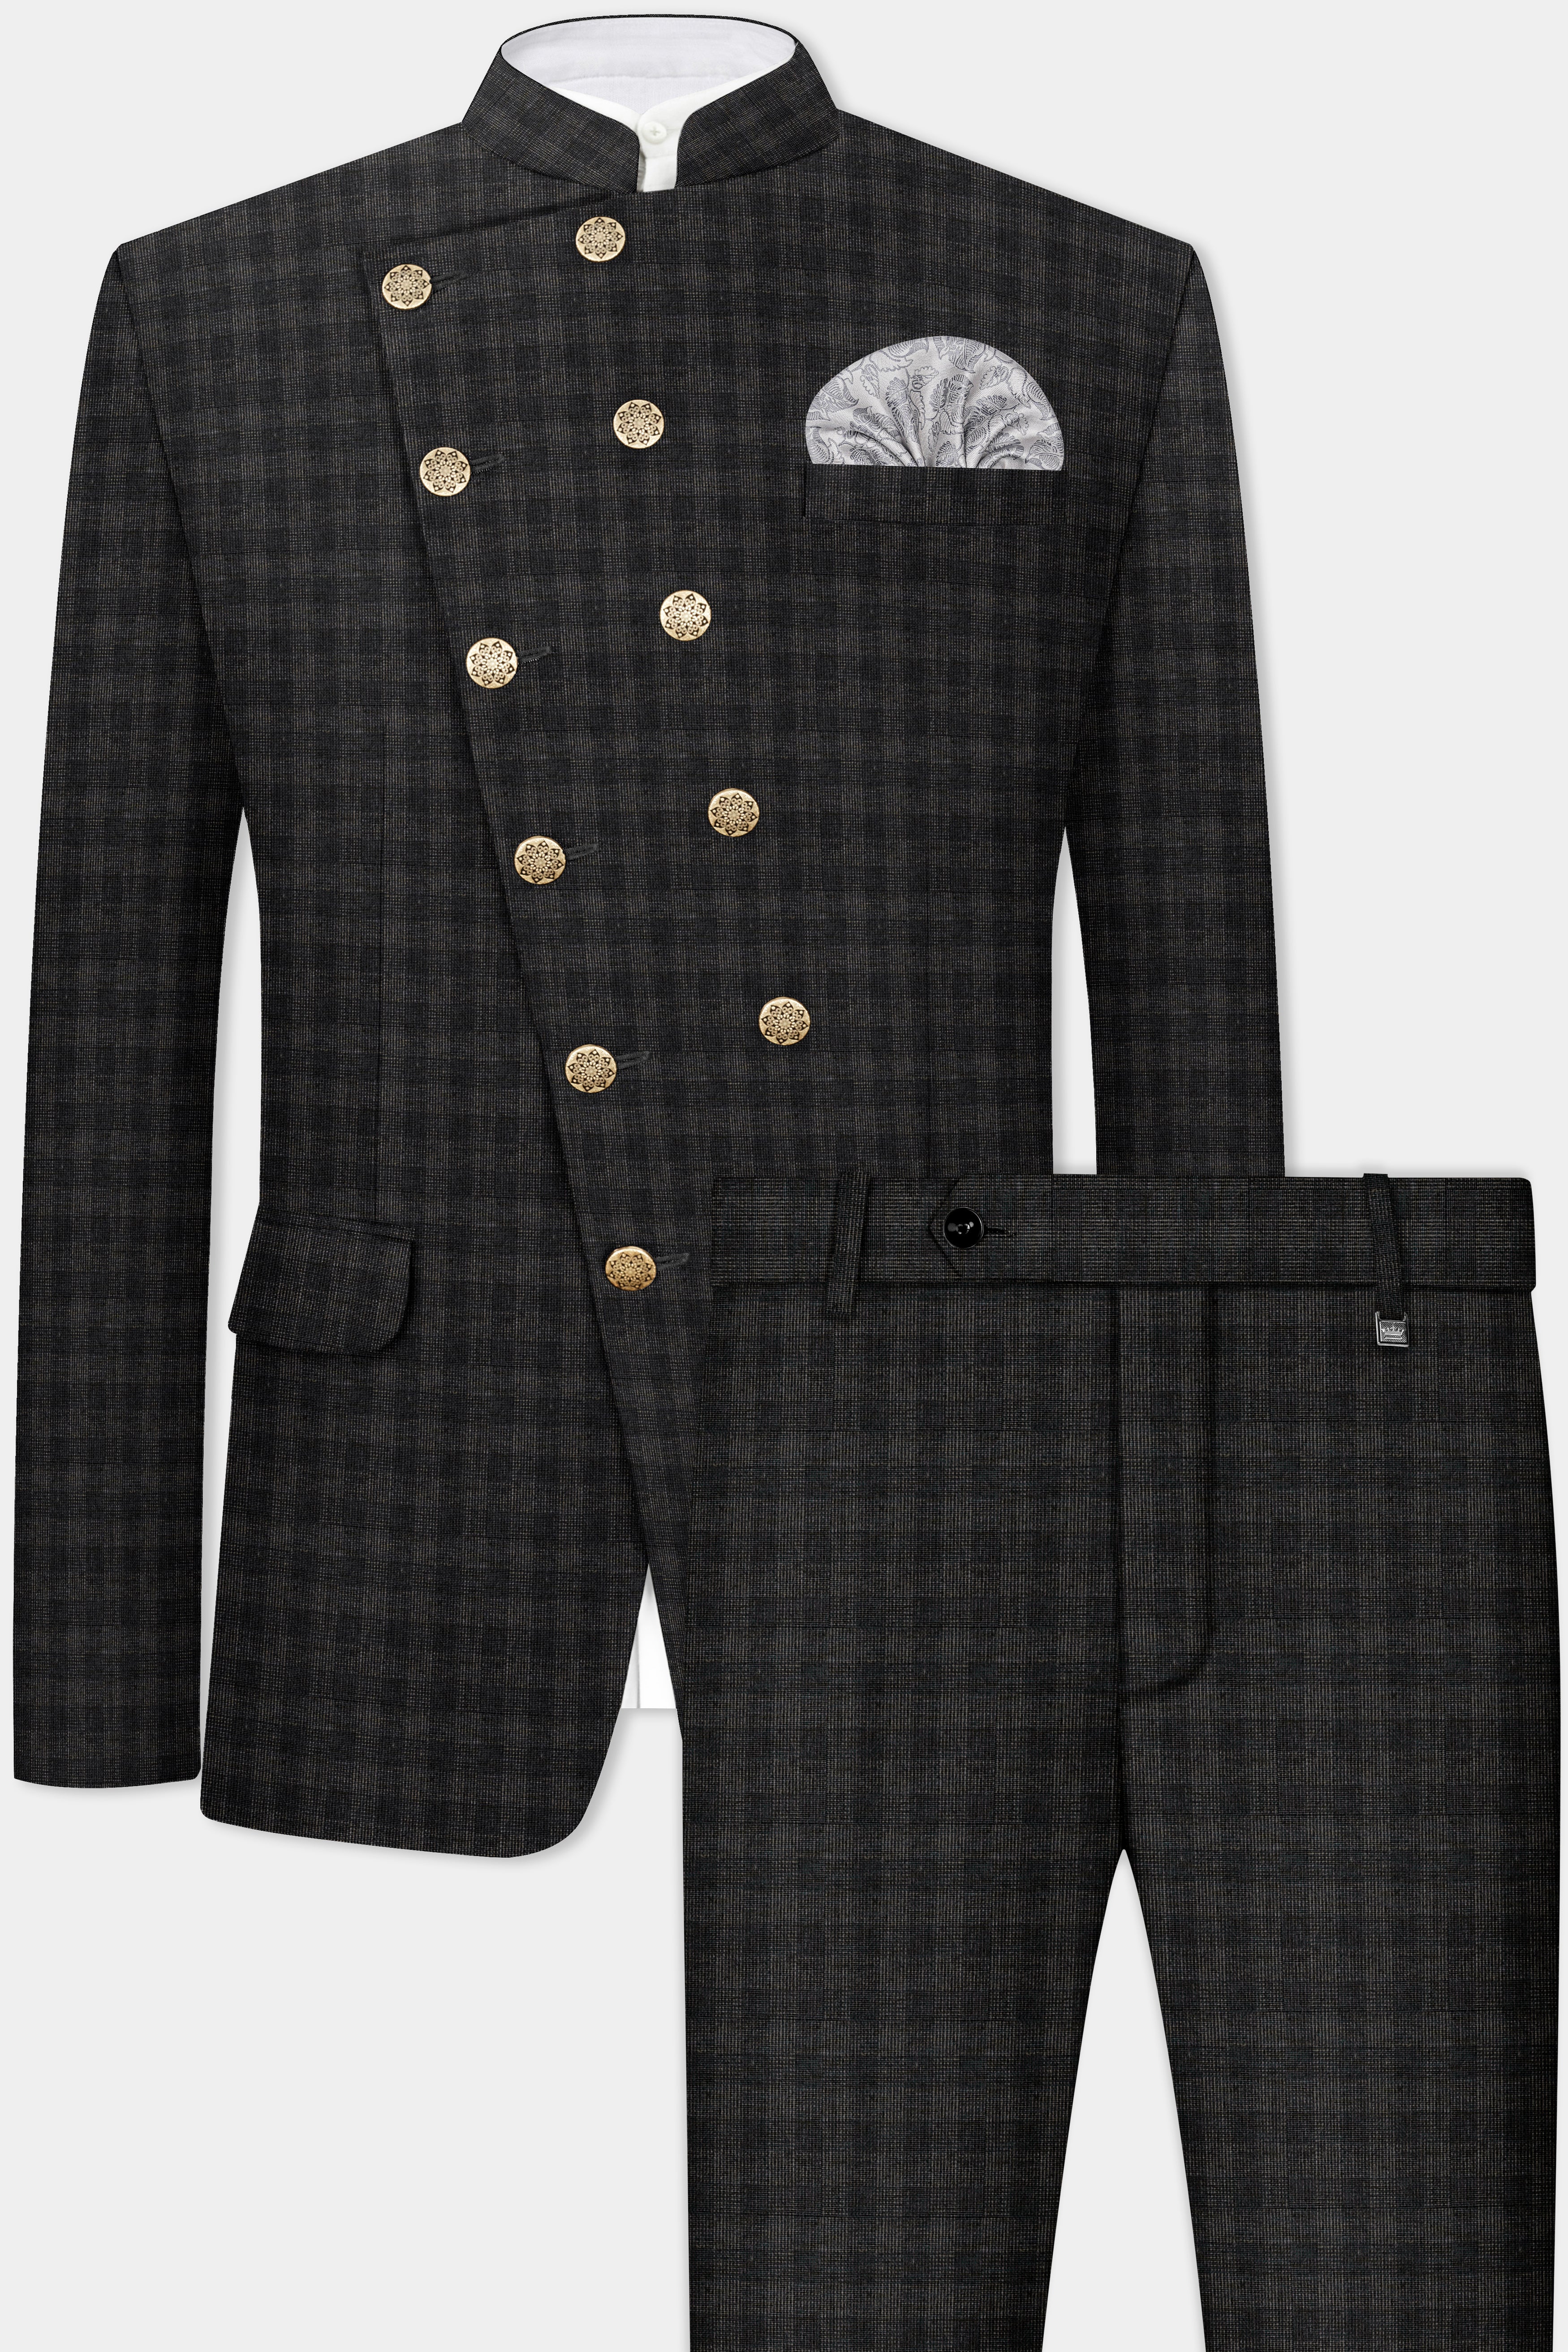 Thunder Gray Plaid Wool Rich Suit